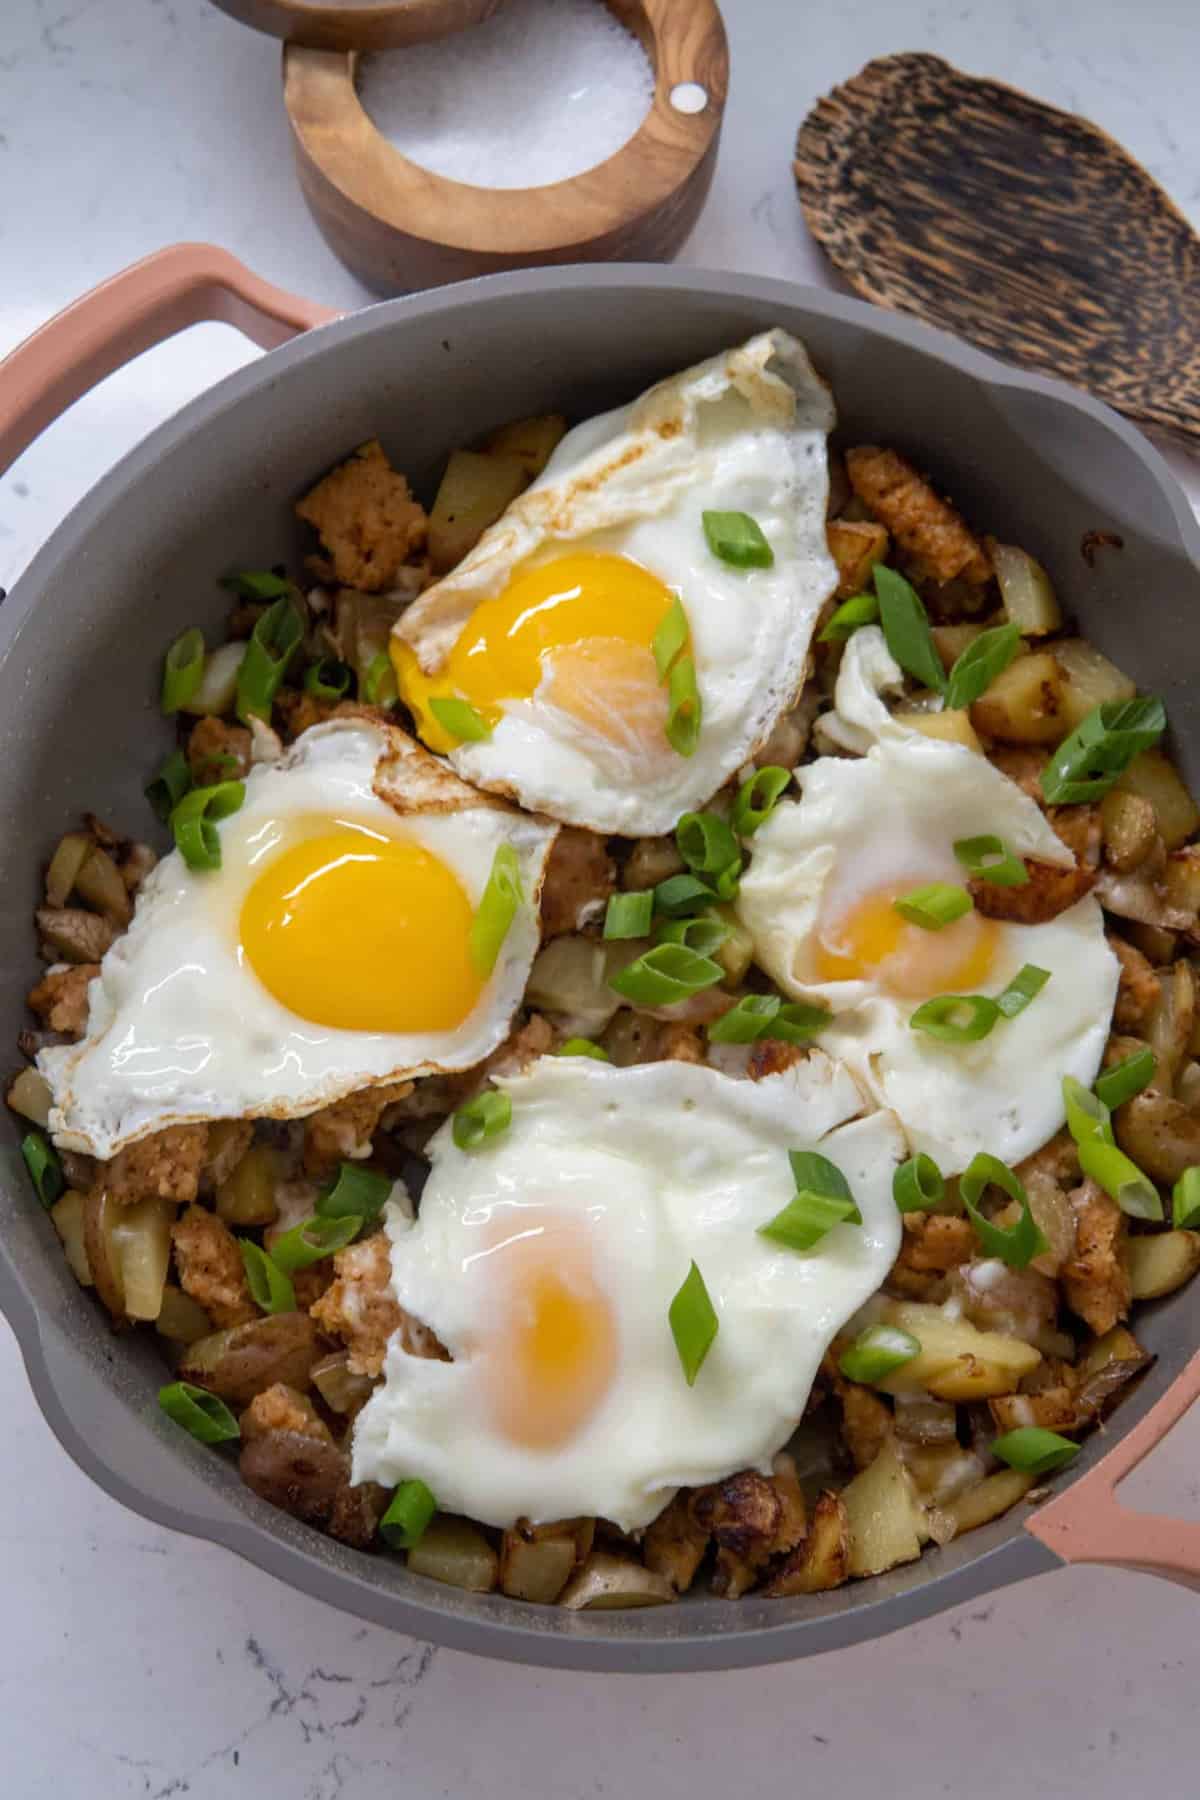 This Sausage Potato Egg Skillet is made with butter, oil, Yukon potatoes, breakfast sausage, eggs, scallions, and cooked to a nice crisp.